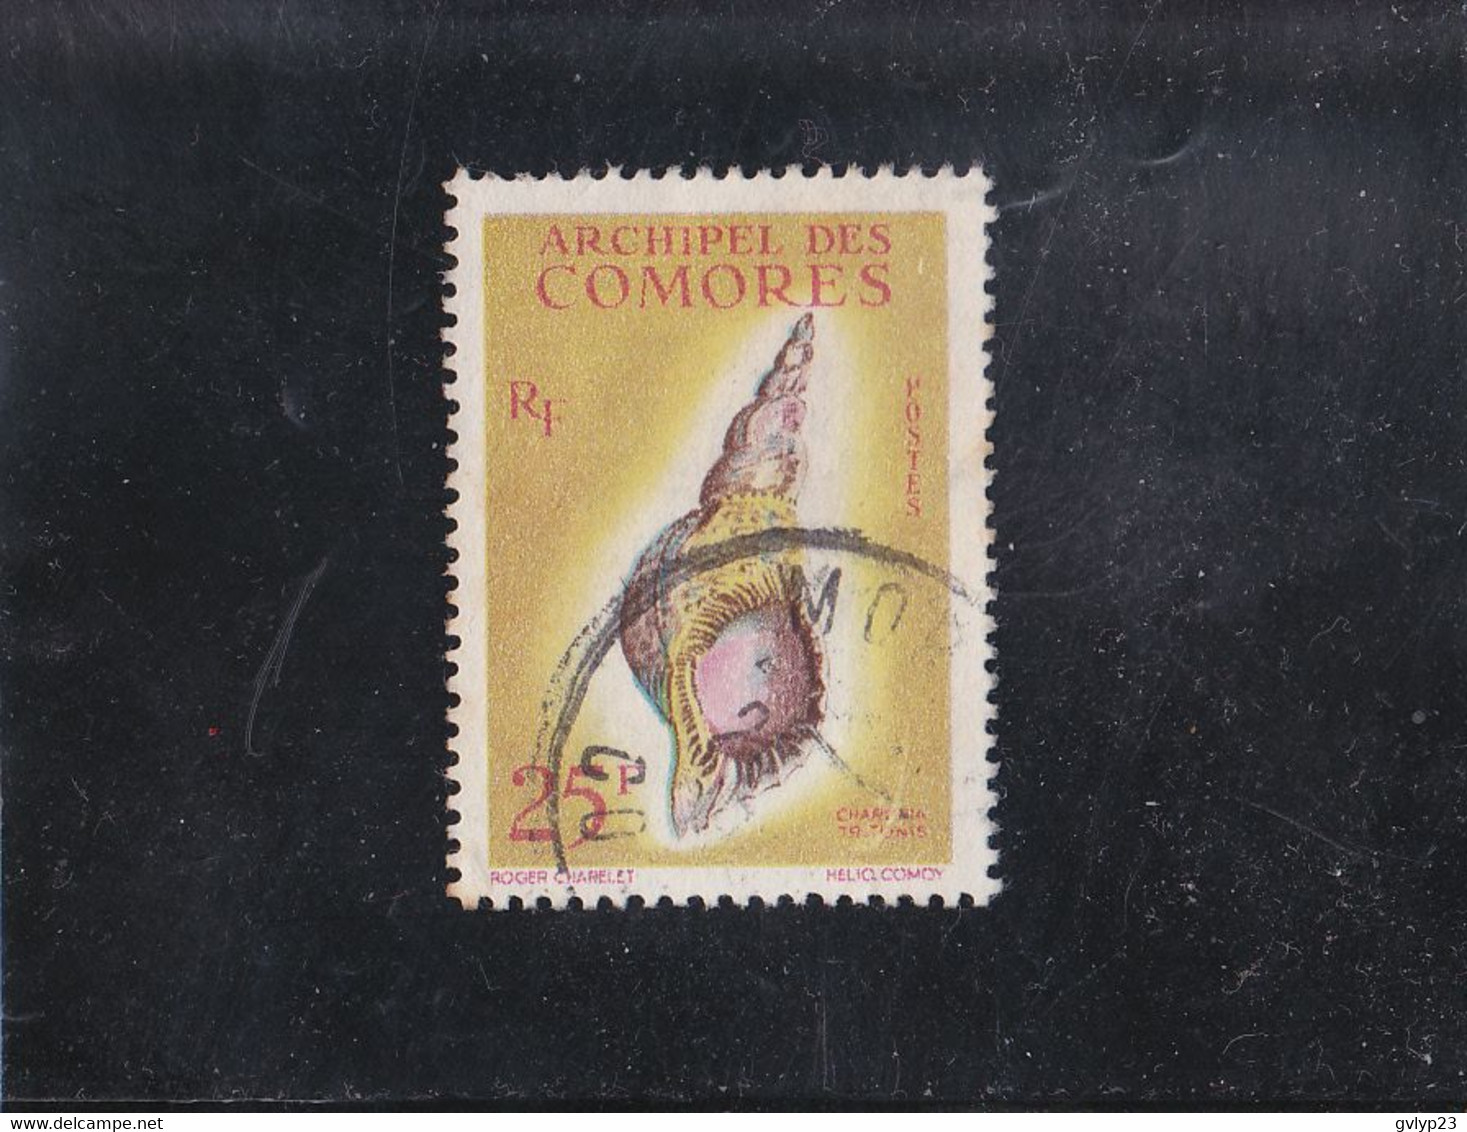 CHARONIA TRITONIS  25F JAUNE/POLYCHROME OBLITéRé N° 24 YVERT ET TELLIER 1962 - Used Stamps